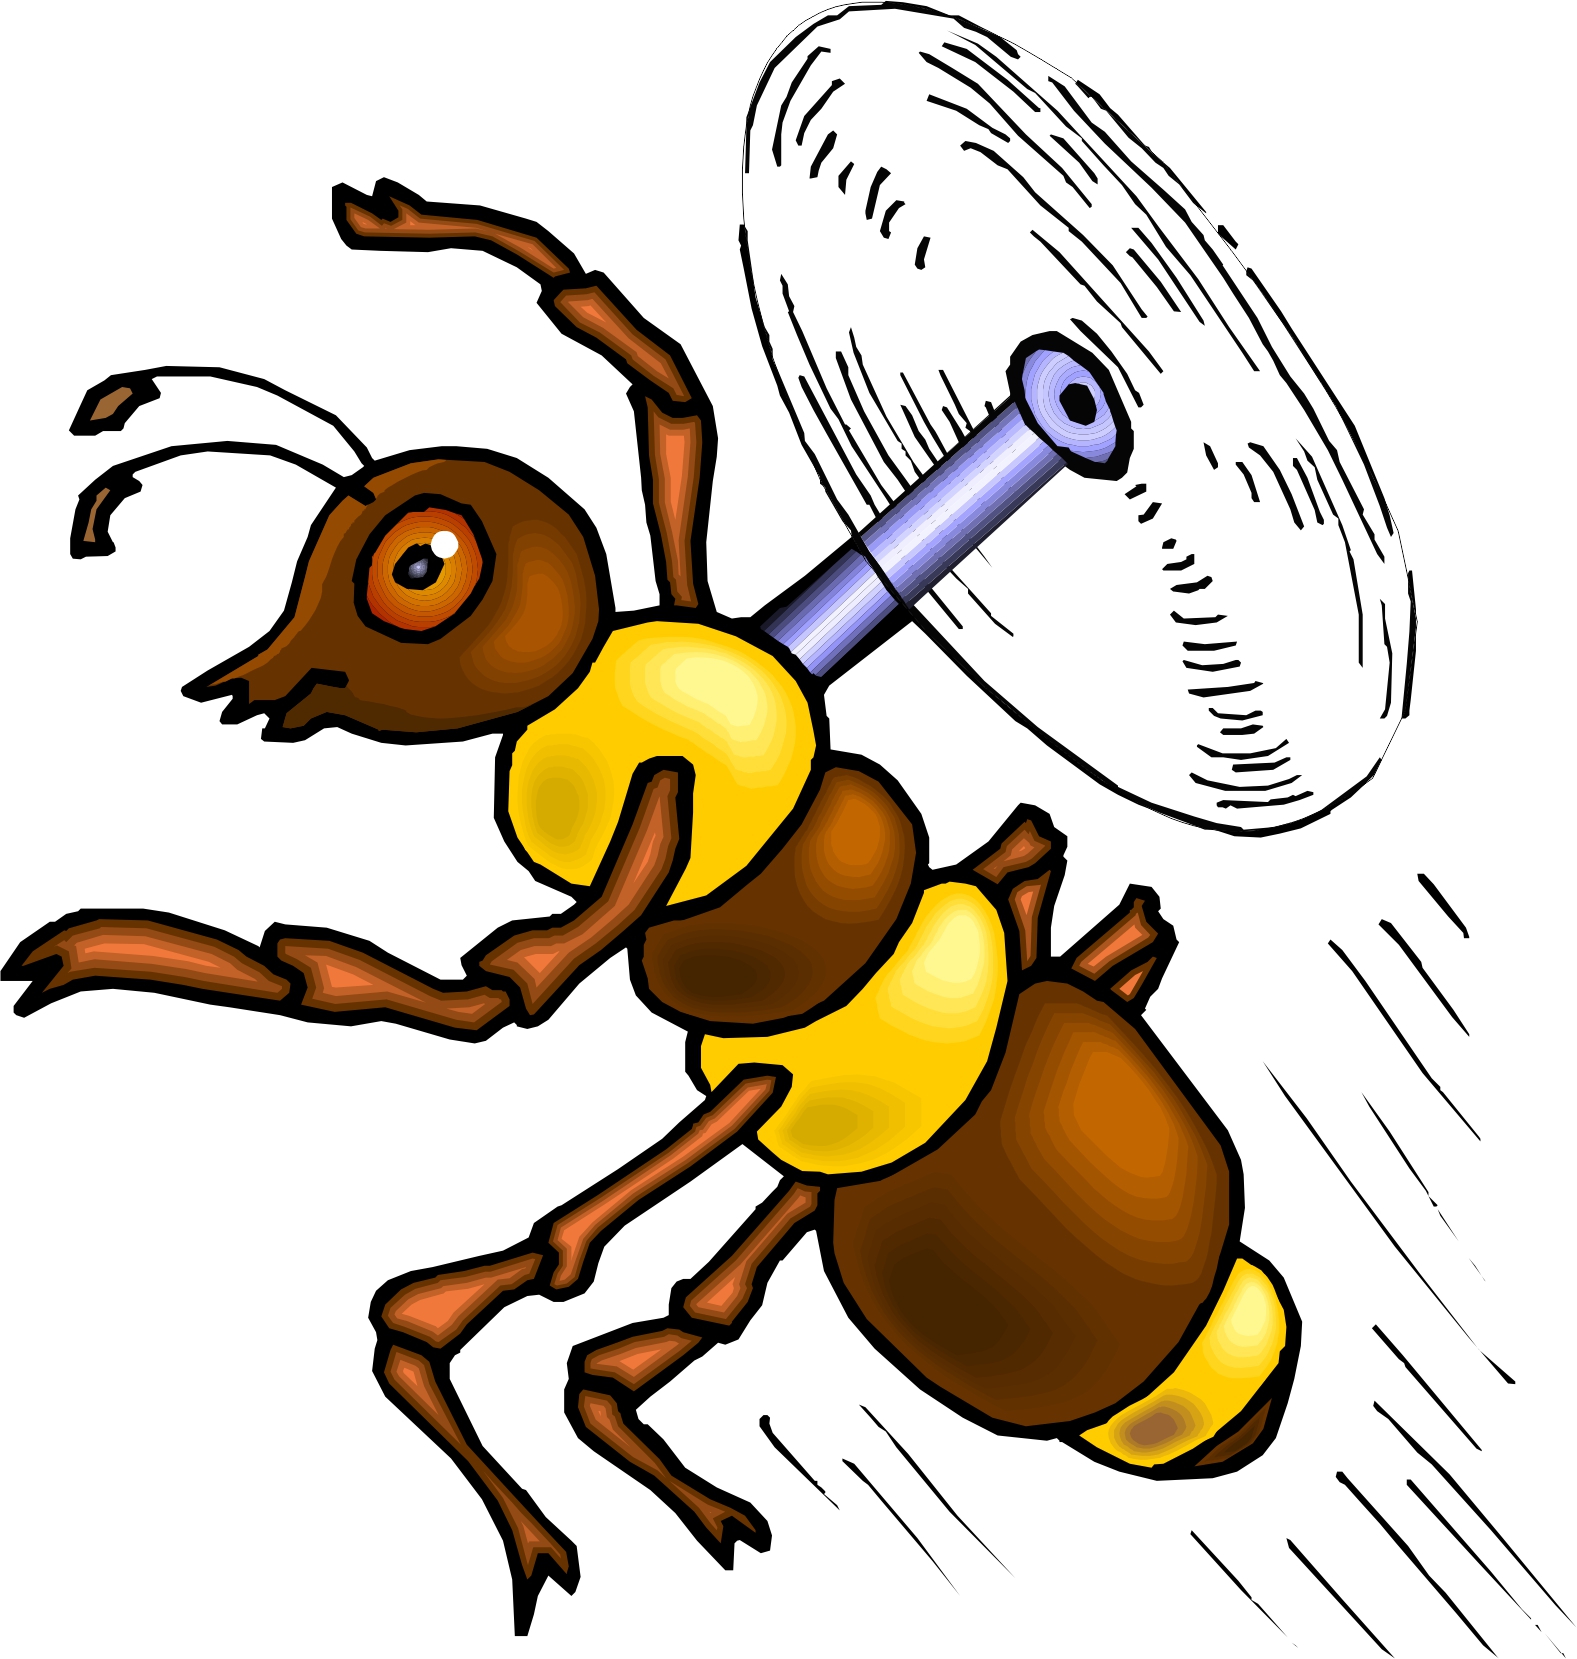 Honey Bee Cartoon Adding Fun And Whimsy To The World Of Honey Bees